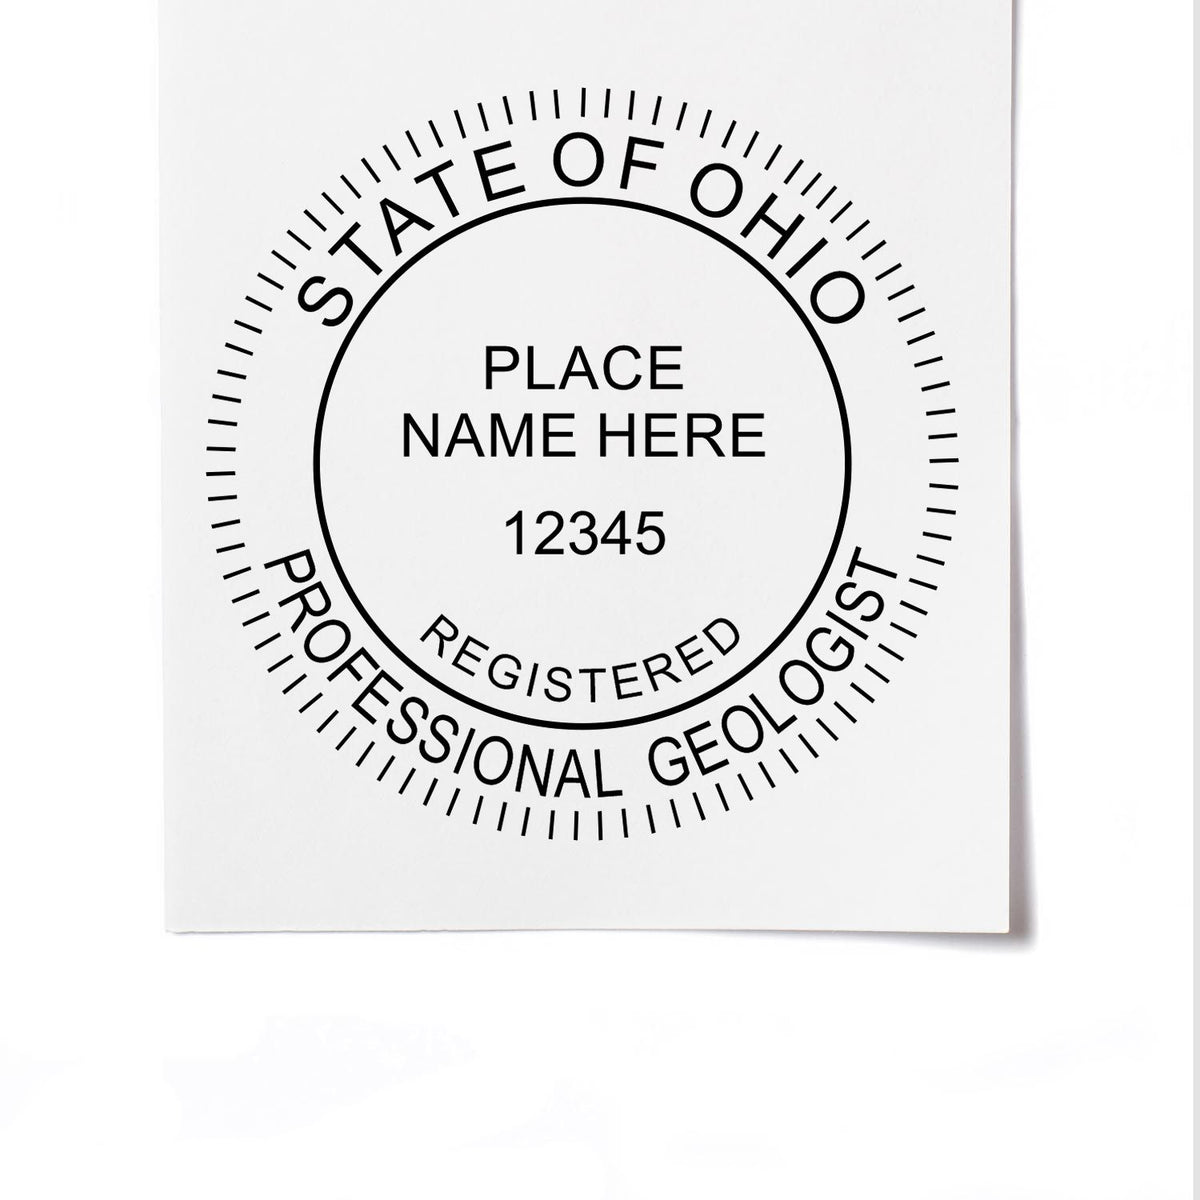 A stamped imprint of the Digital Ohio Geologist Stamp, Electronic Seal for Ohio Geologist in this stylish lifestyle photo, setting the tone for a unique and personalized product.